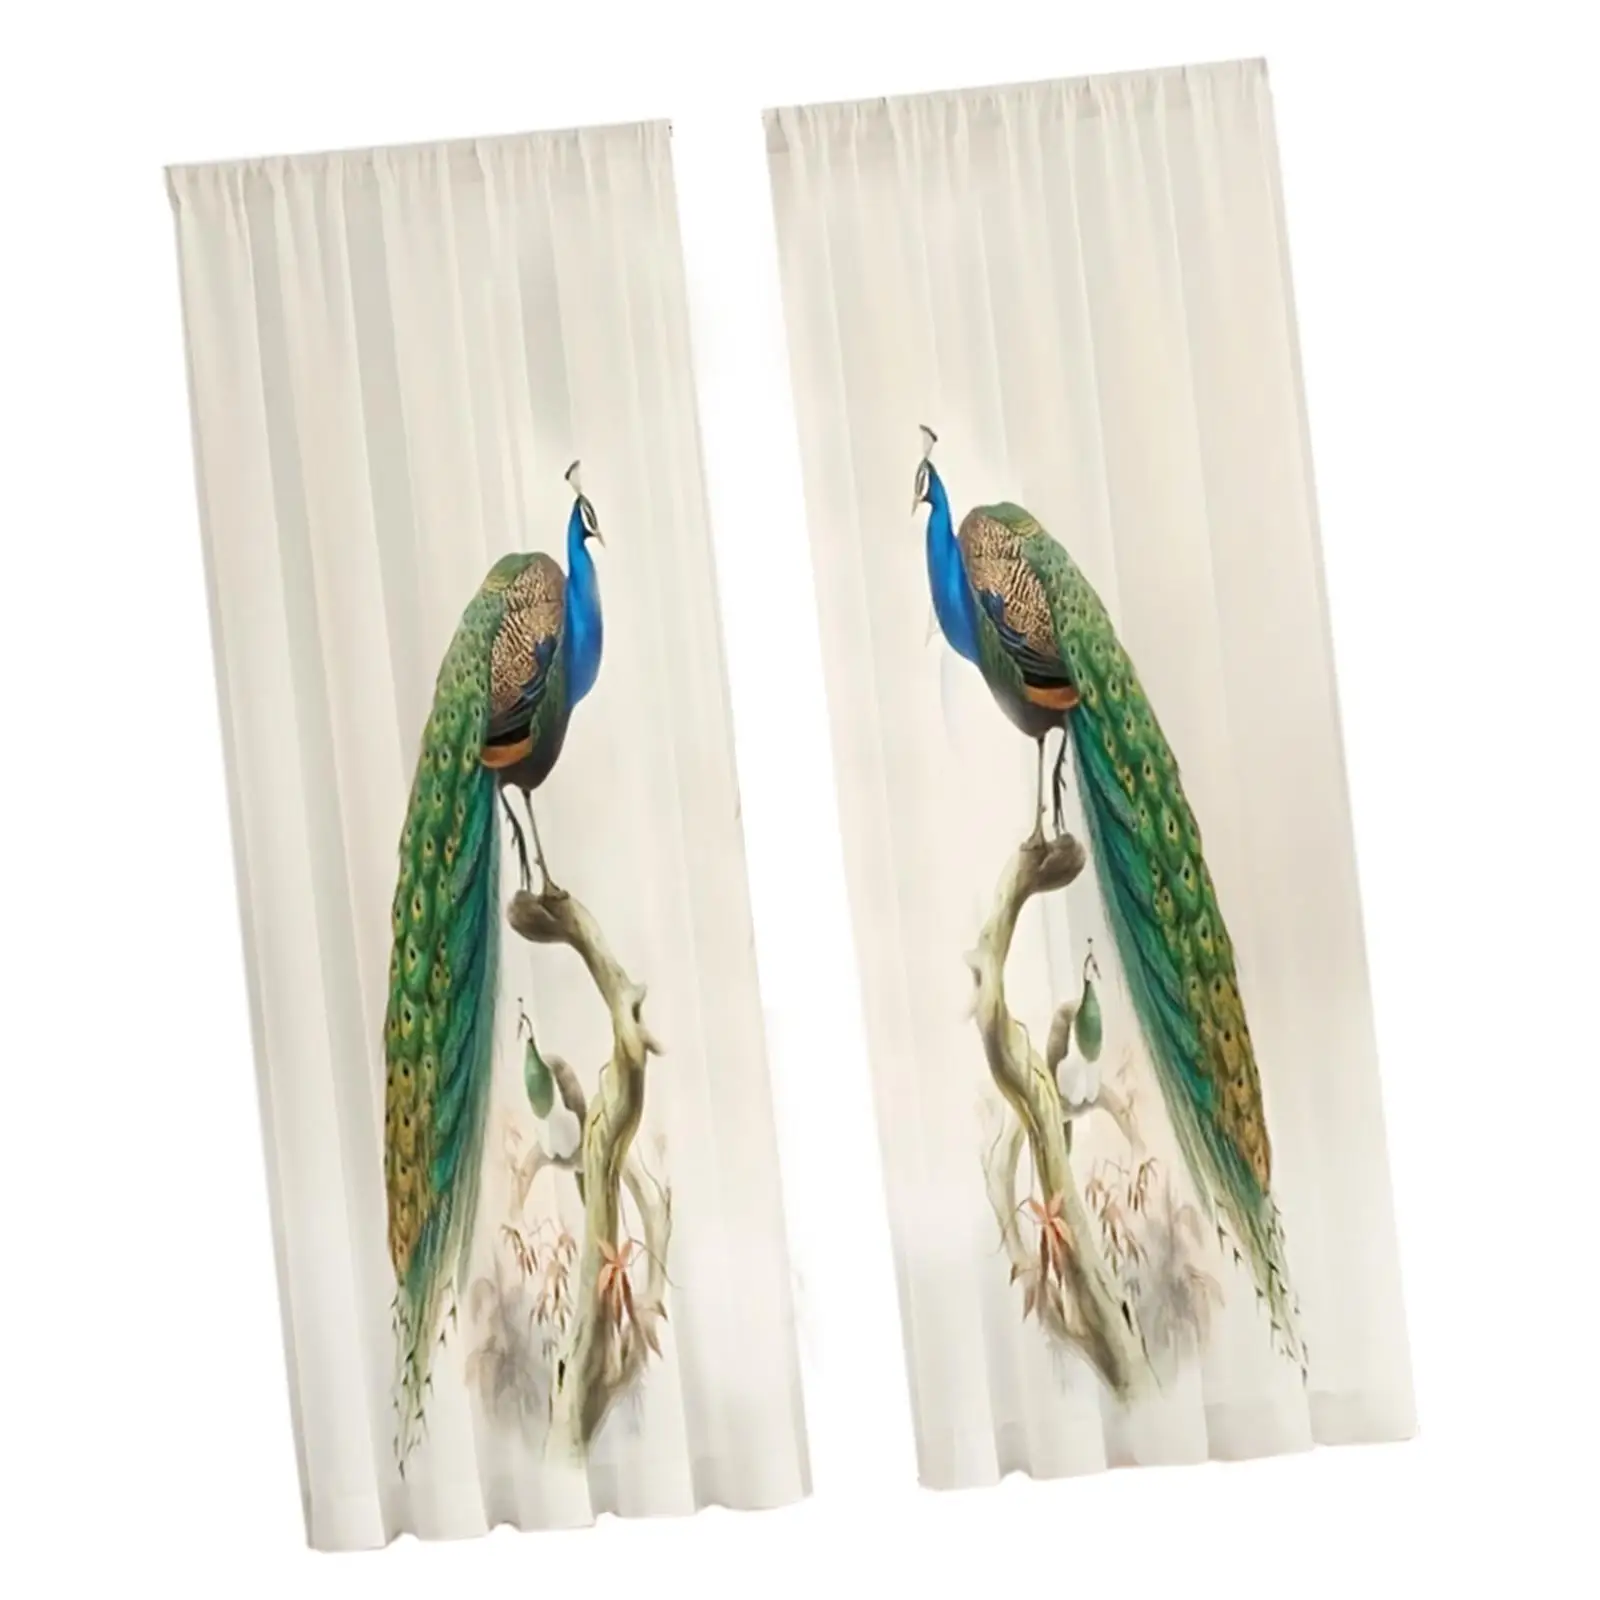 Printed Sheer Curtains 52wx95L Sheer Drapes for Home Yard Decoration Kitchen